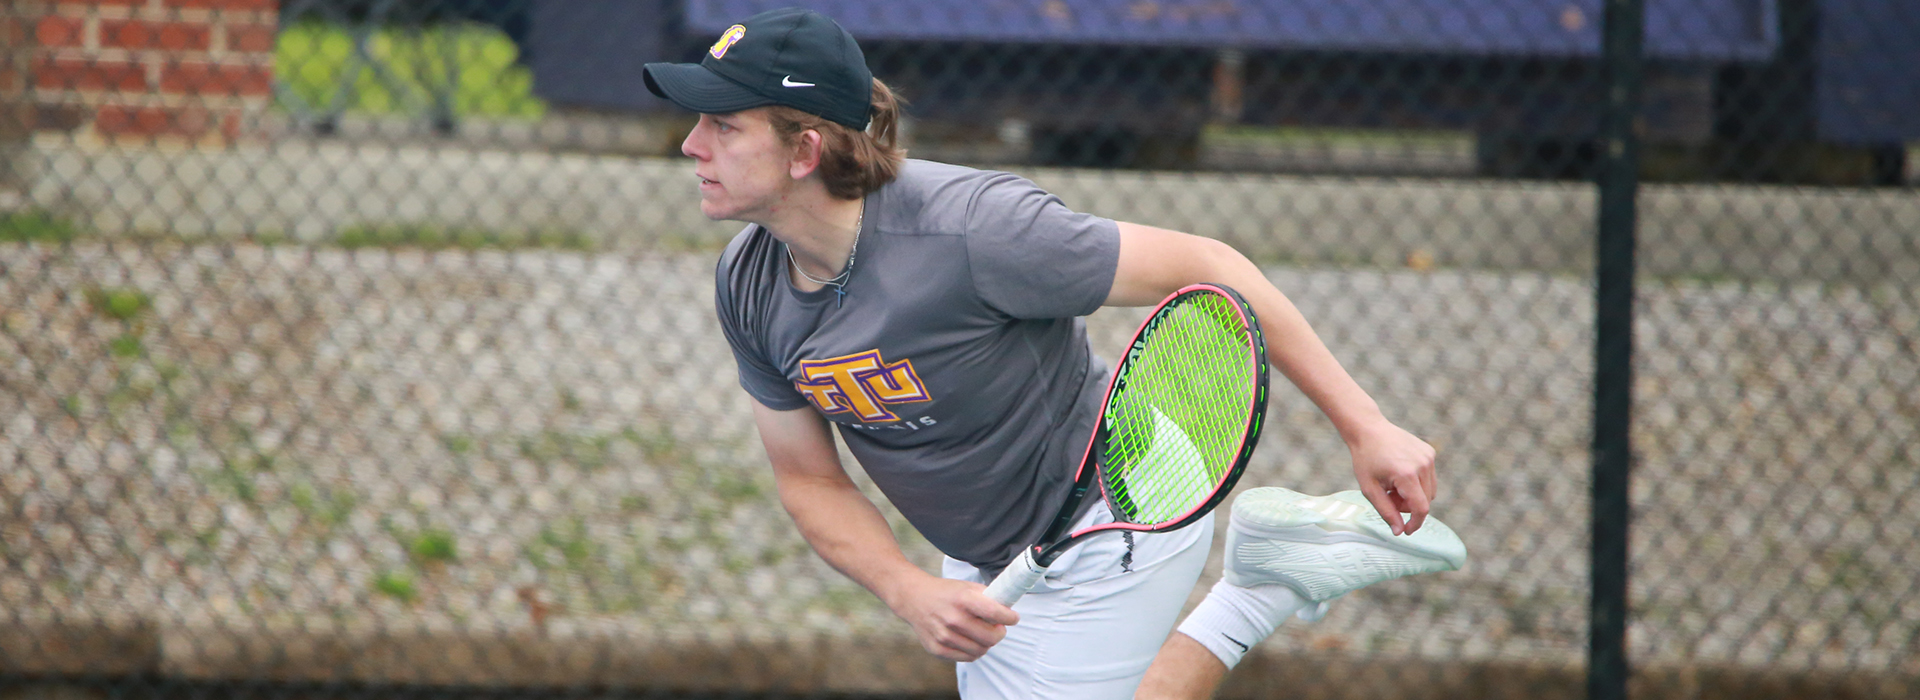 Tech tennis welcomes Austin Peay to town for final home match of season